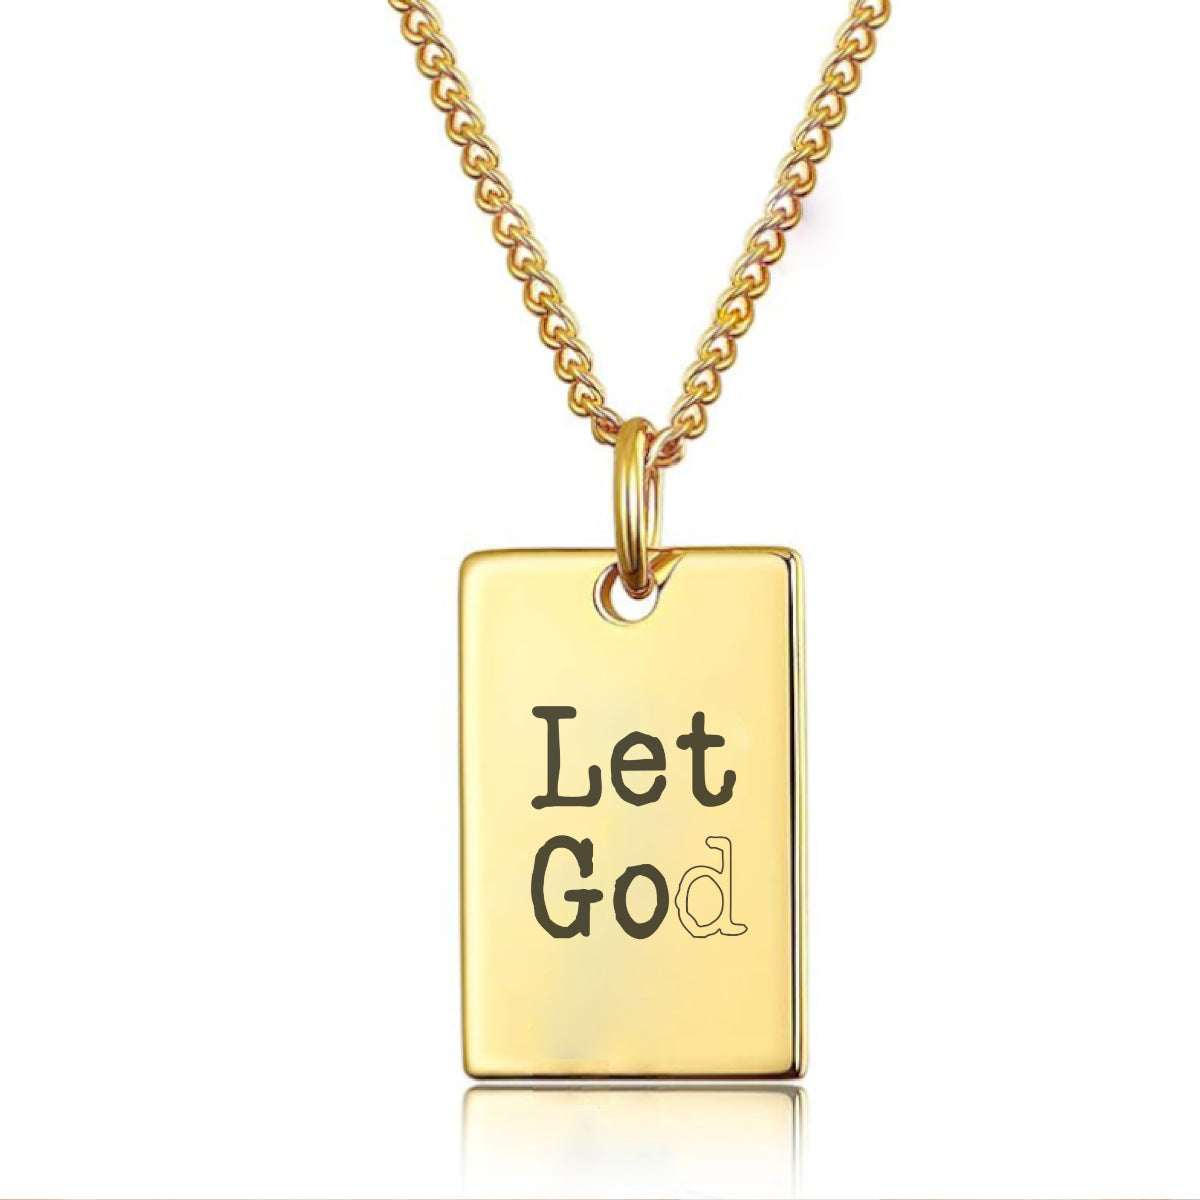 Let Go and Let God Inspirational Necklace Spiritual Guidance and Trust Perfect Gift for Hope Faith Seekers Rose Gold Minimalist Necklace